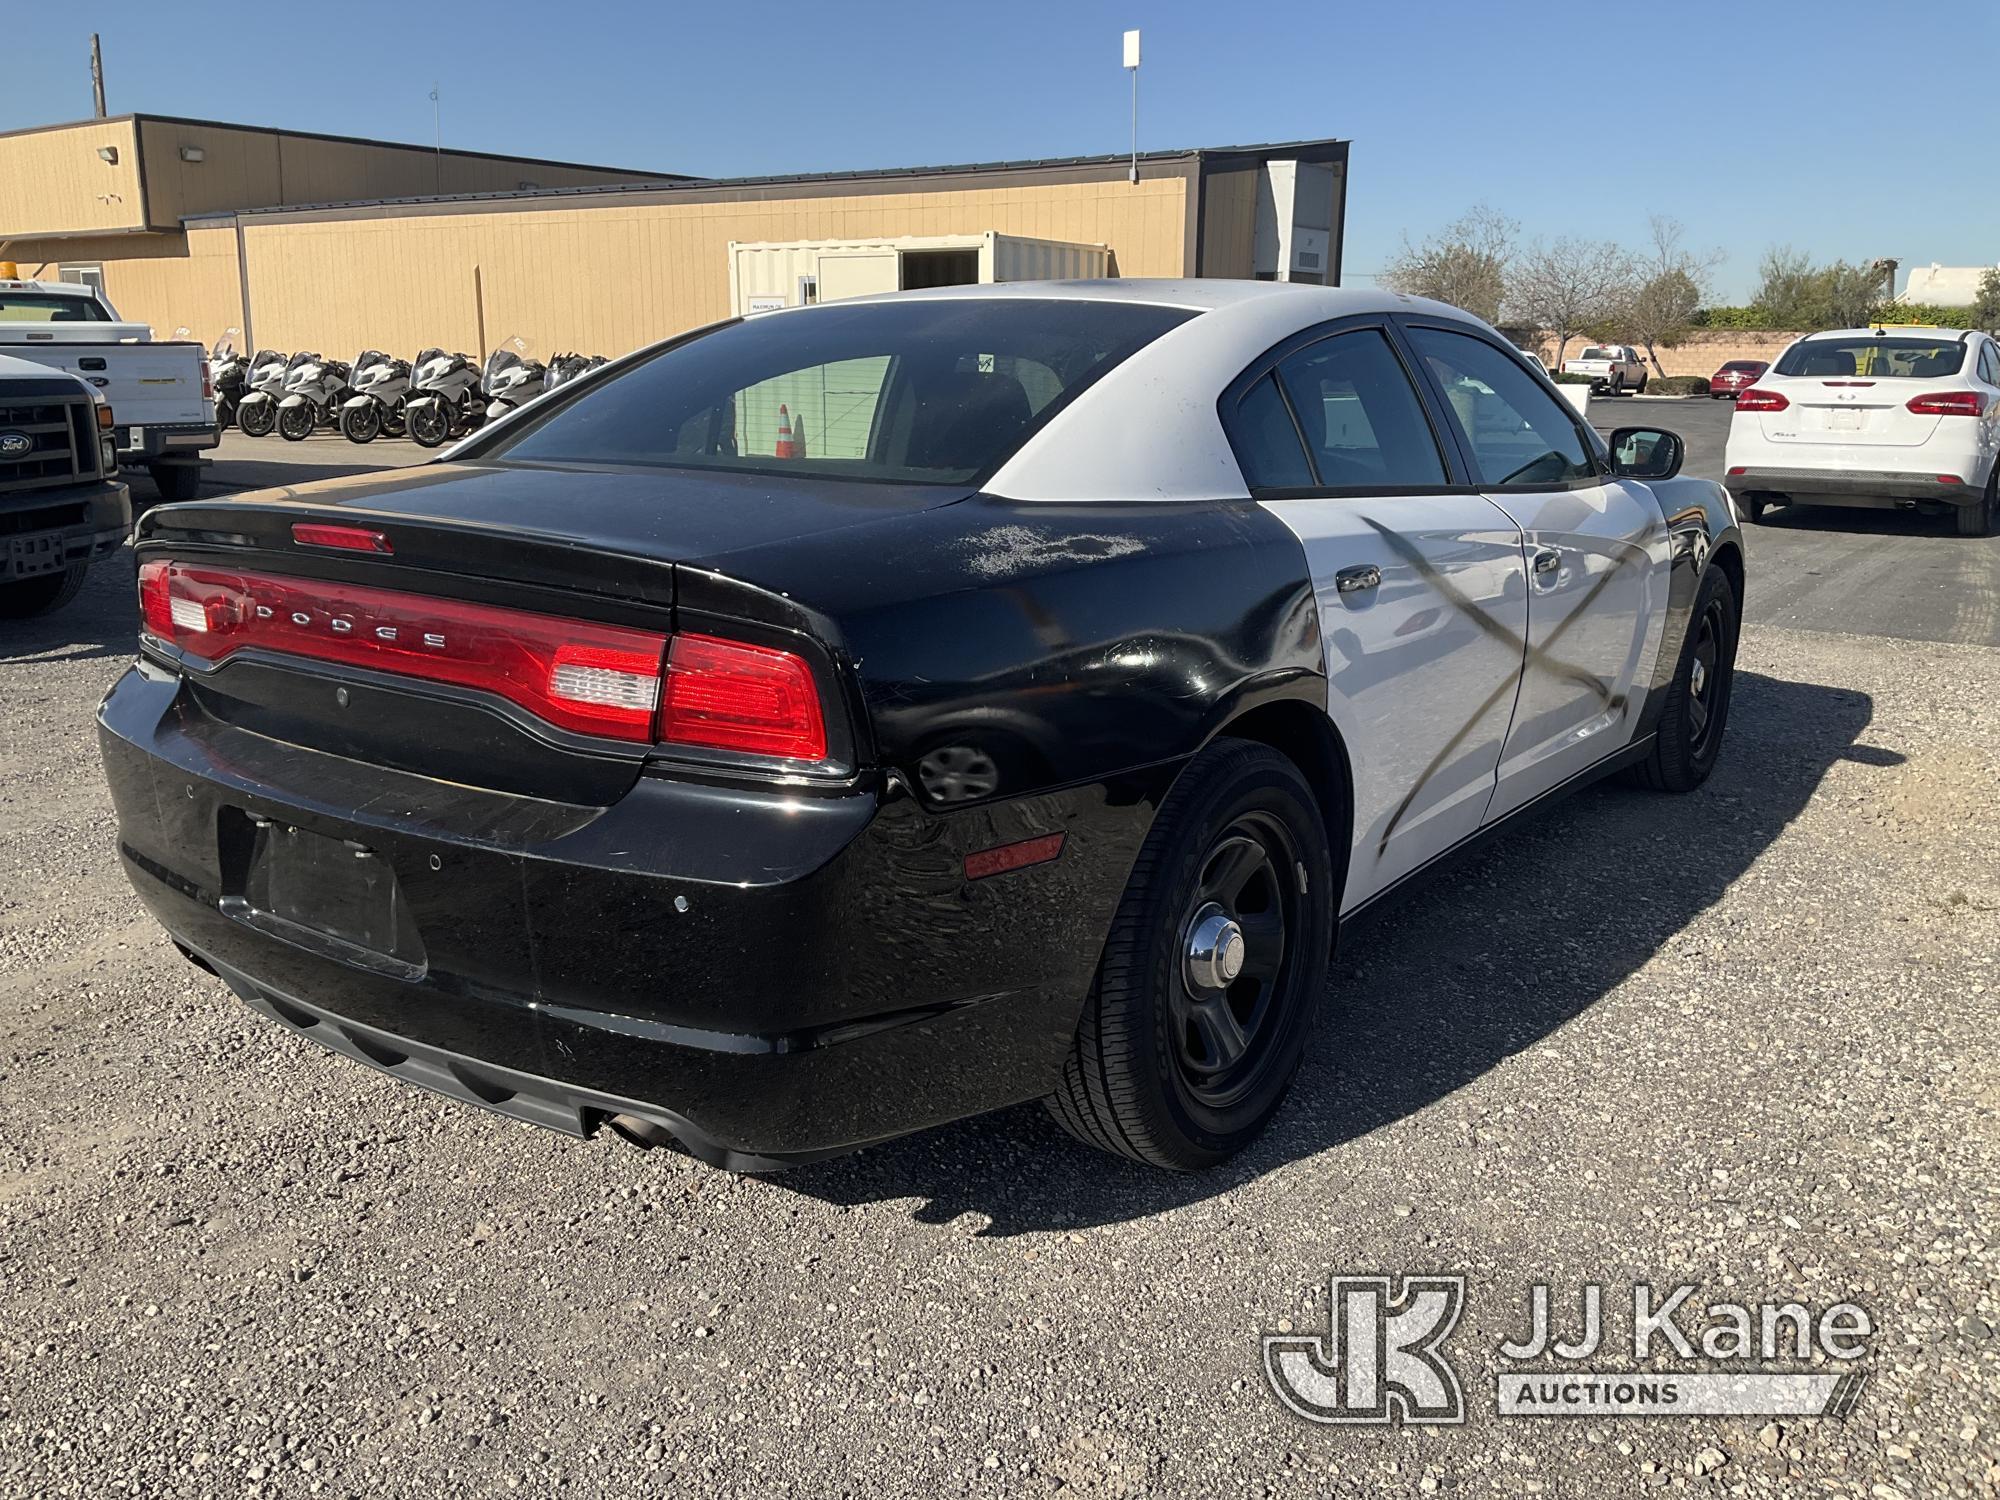 (Jurupa Valley, CA) 2014 Dodge Charger Police Package 4-Door Sedan Runs & Moves Abs Lights Is On, Ai